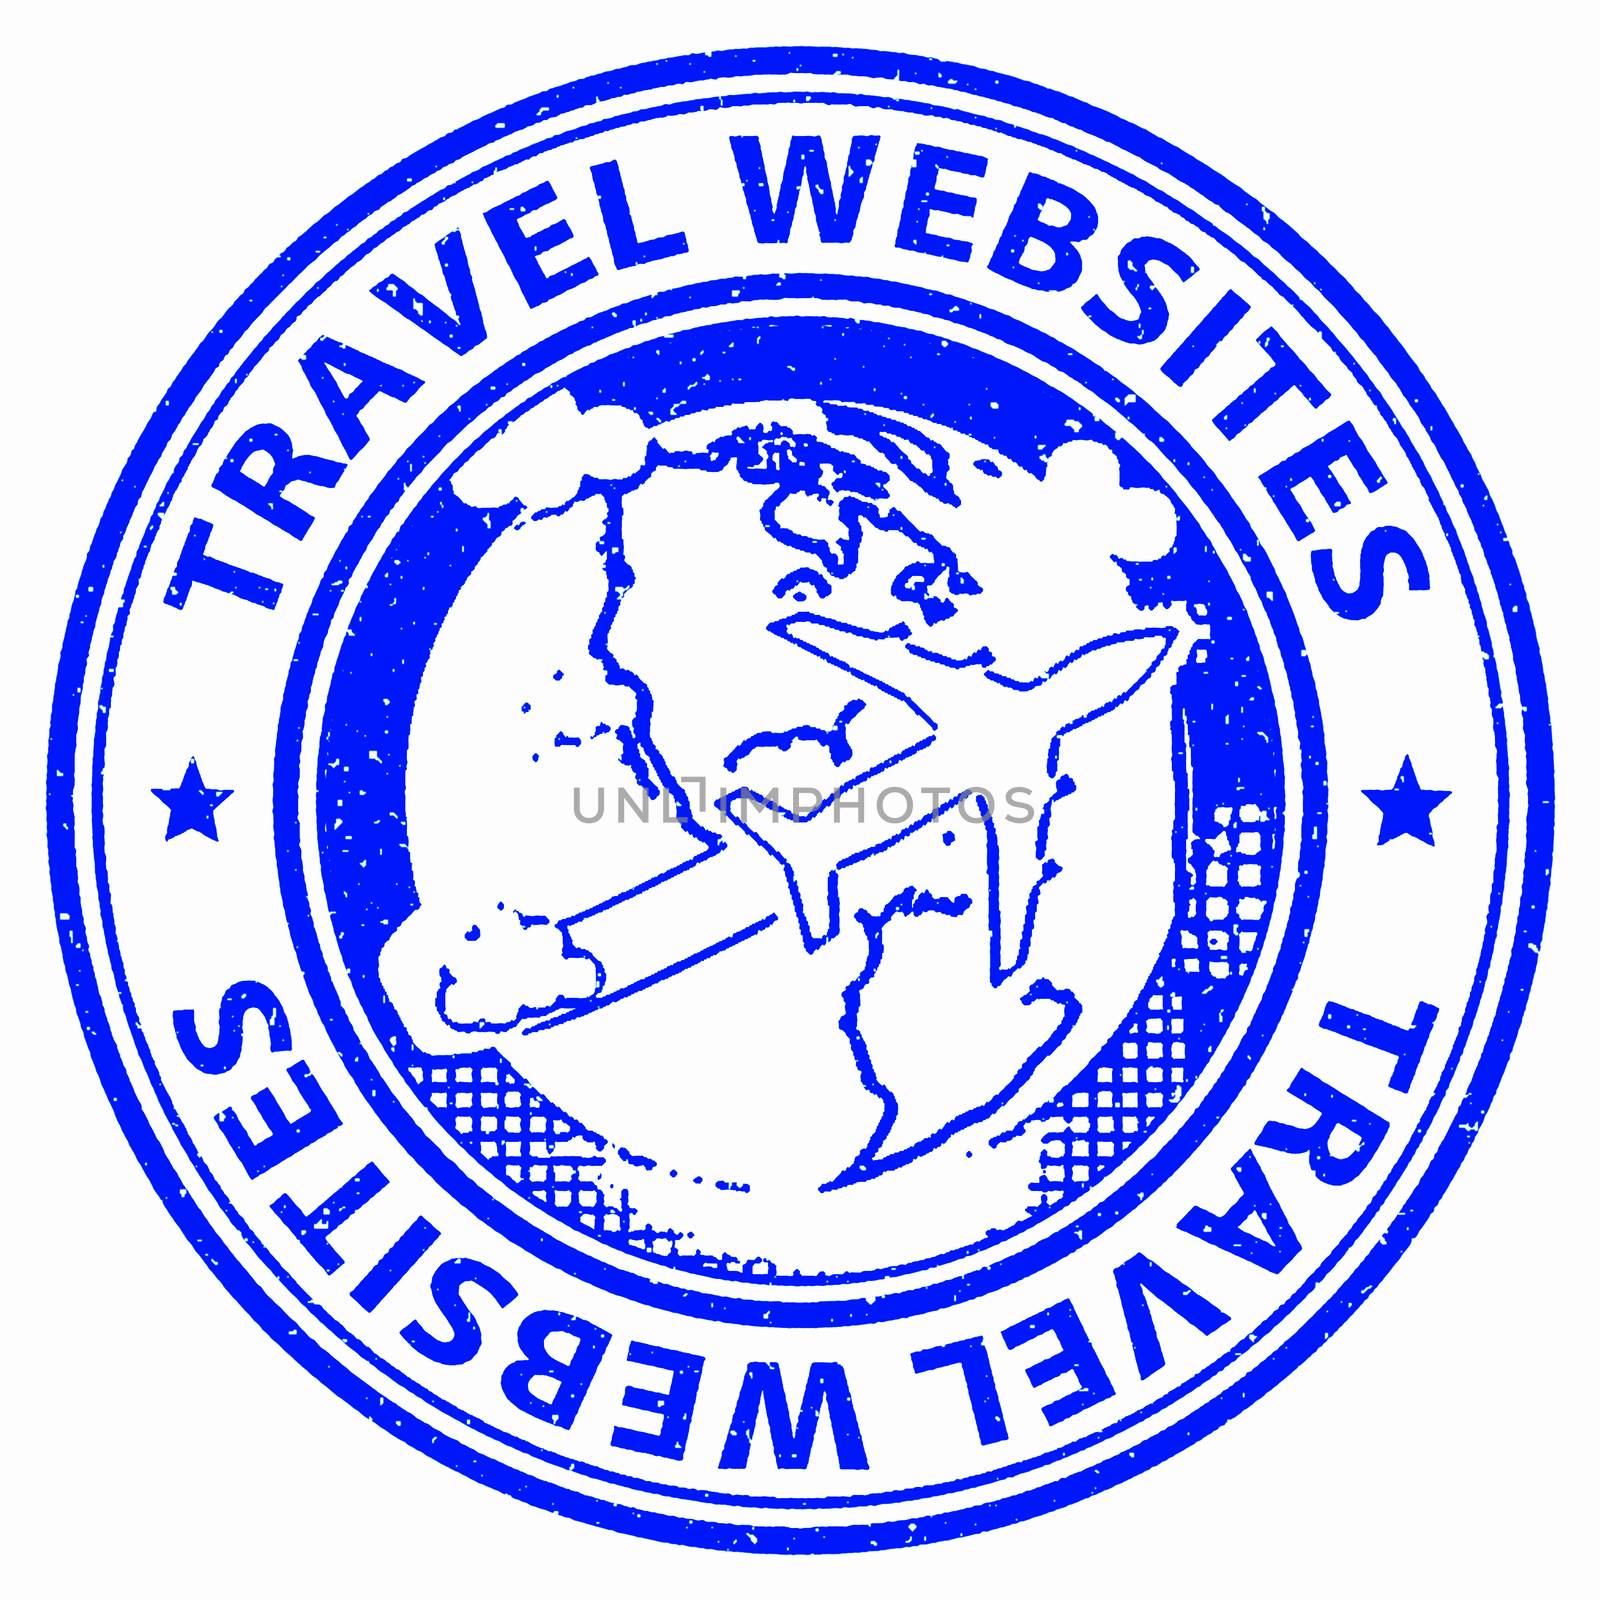 Travel Websites Shows Vacation Journeys And Getaway by stuartmiles